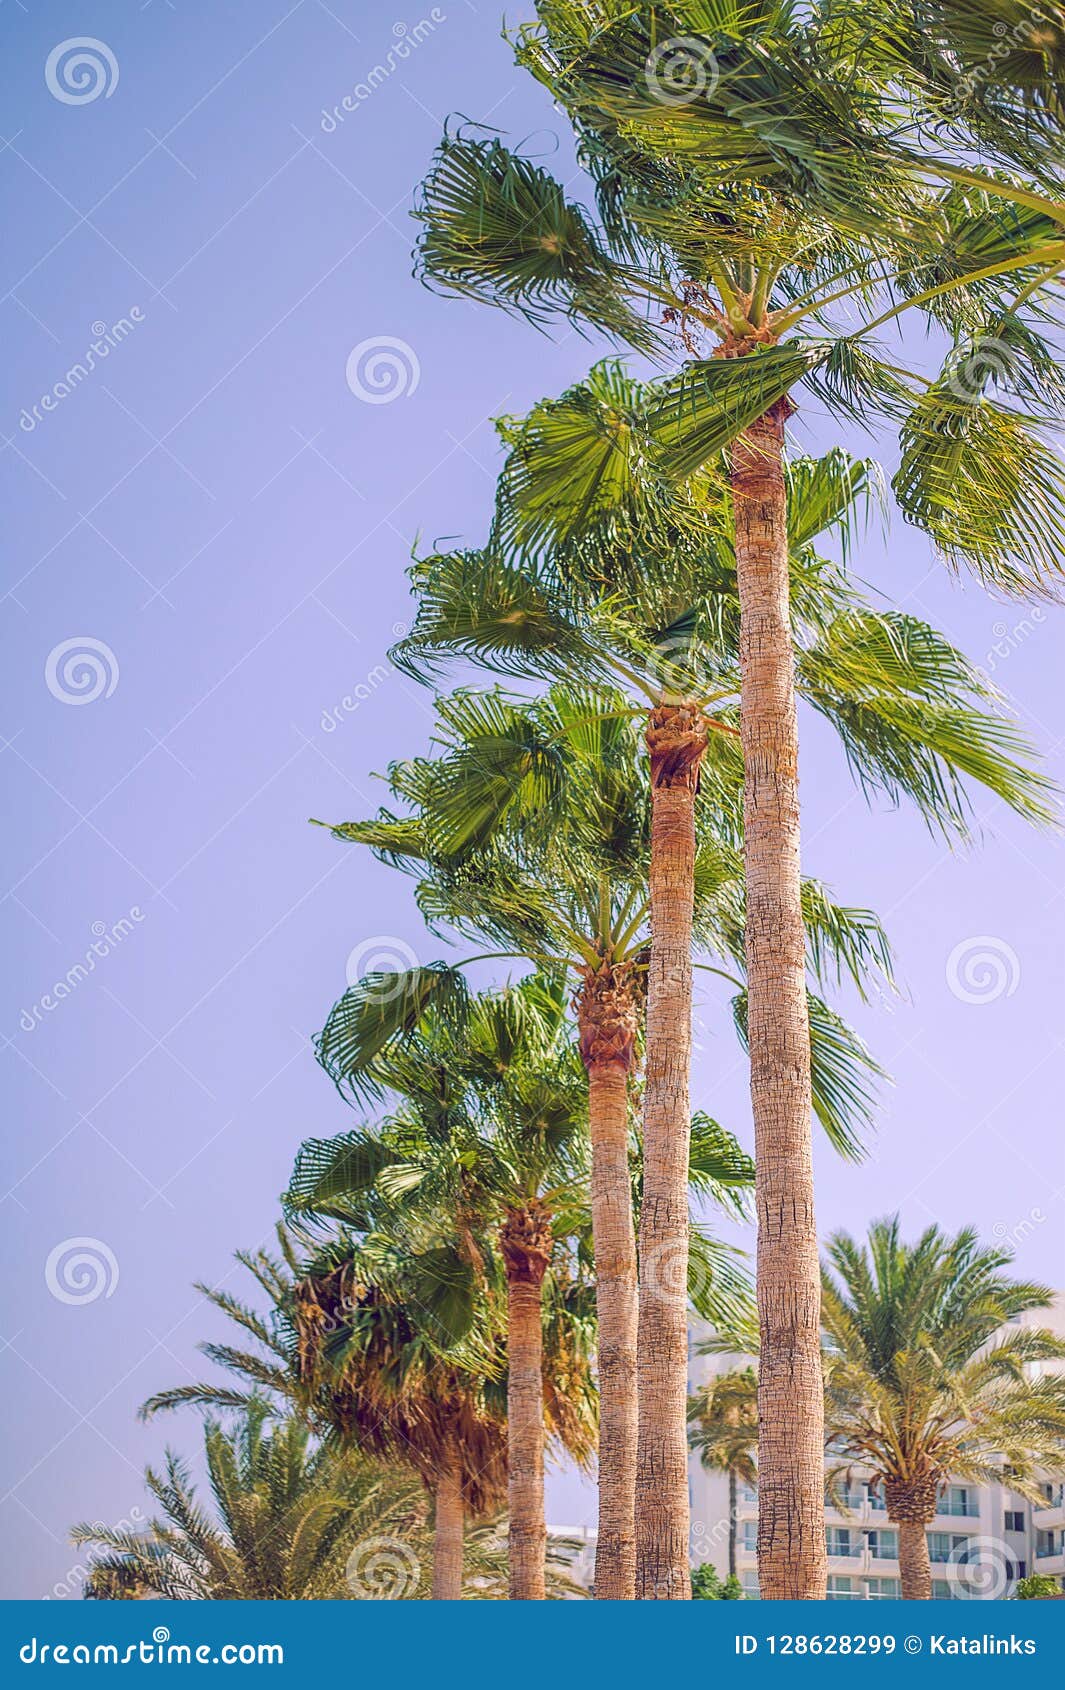 Tropical Resort with Palm Trees Near Beach Stock Image - Image of ...